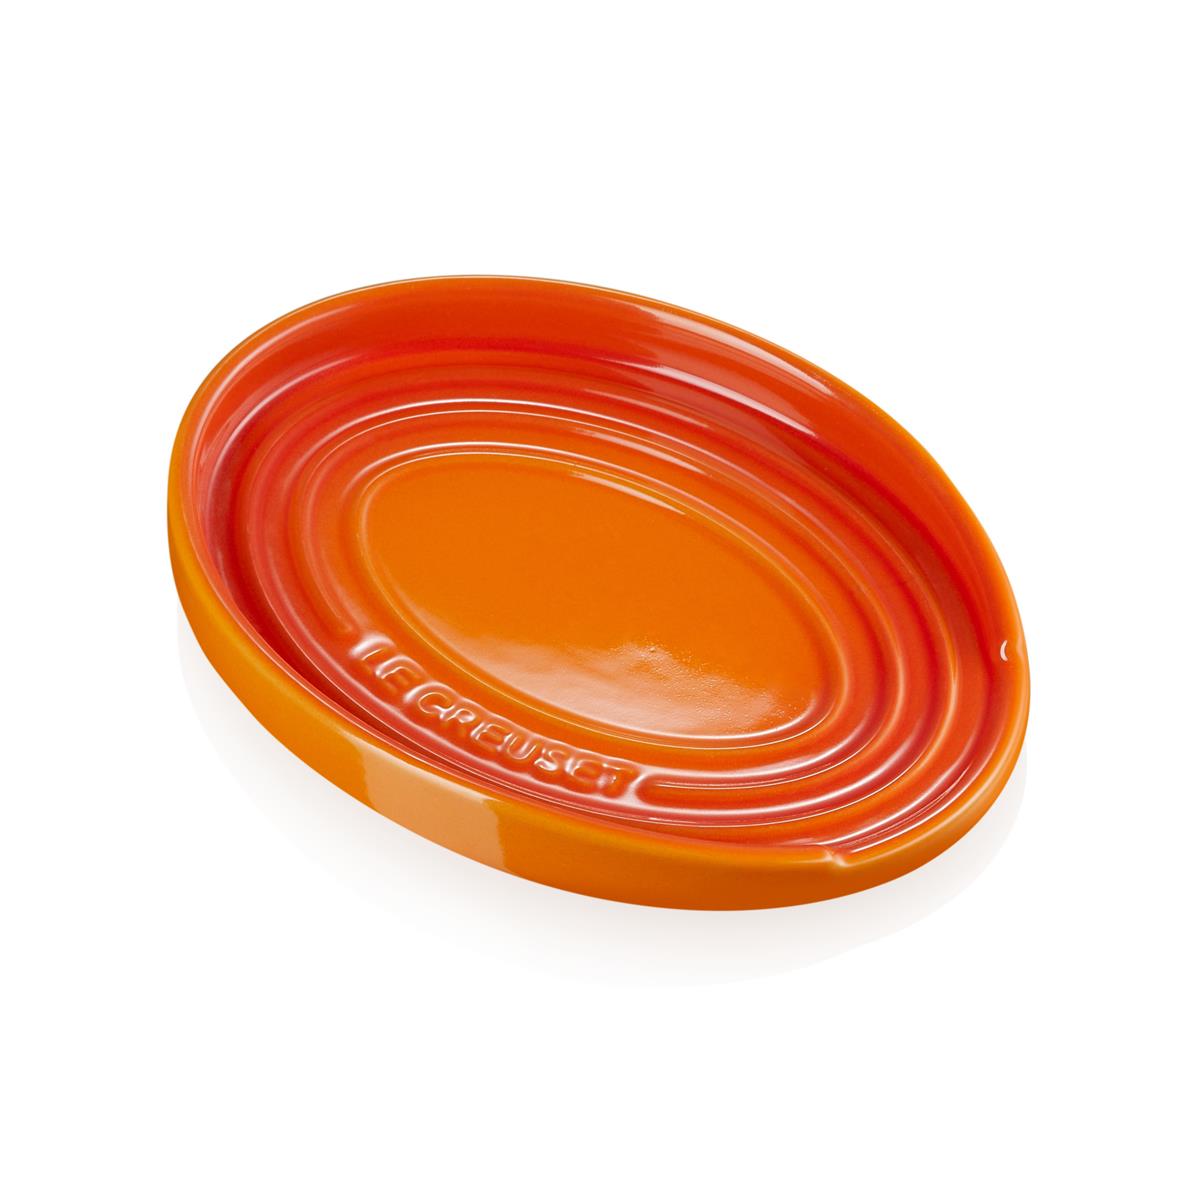 What are the uses of the Le Creuset spoon rest while cooking?